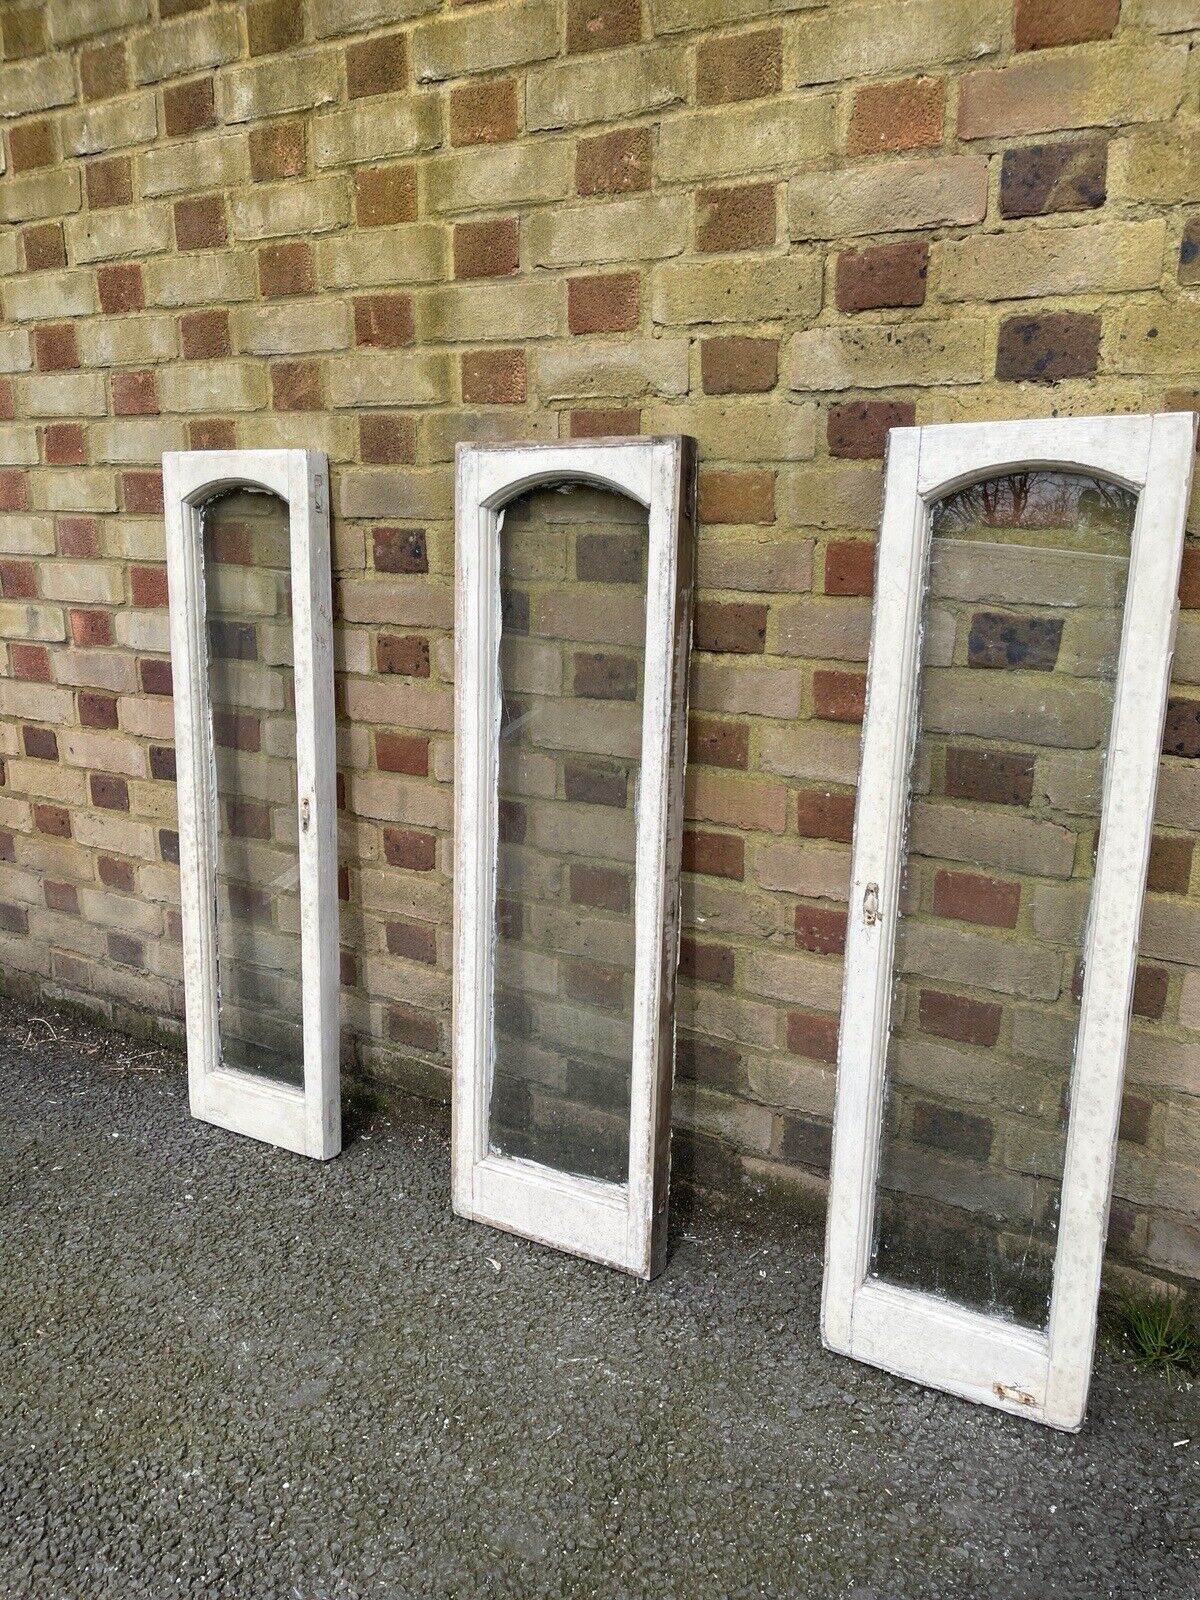 Job Lot Of 3 Reclaimed Old Edwardian Arch Wooden Windows 1095 x 300mm